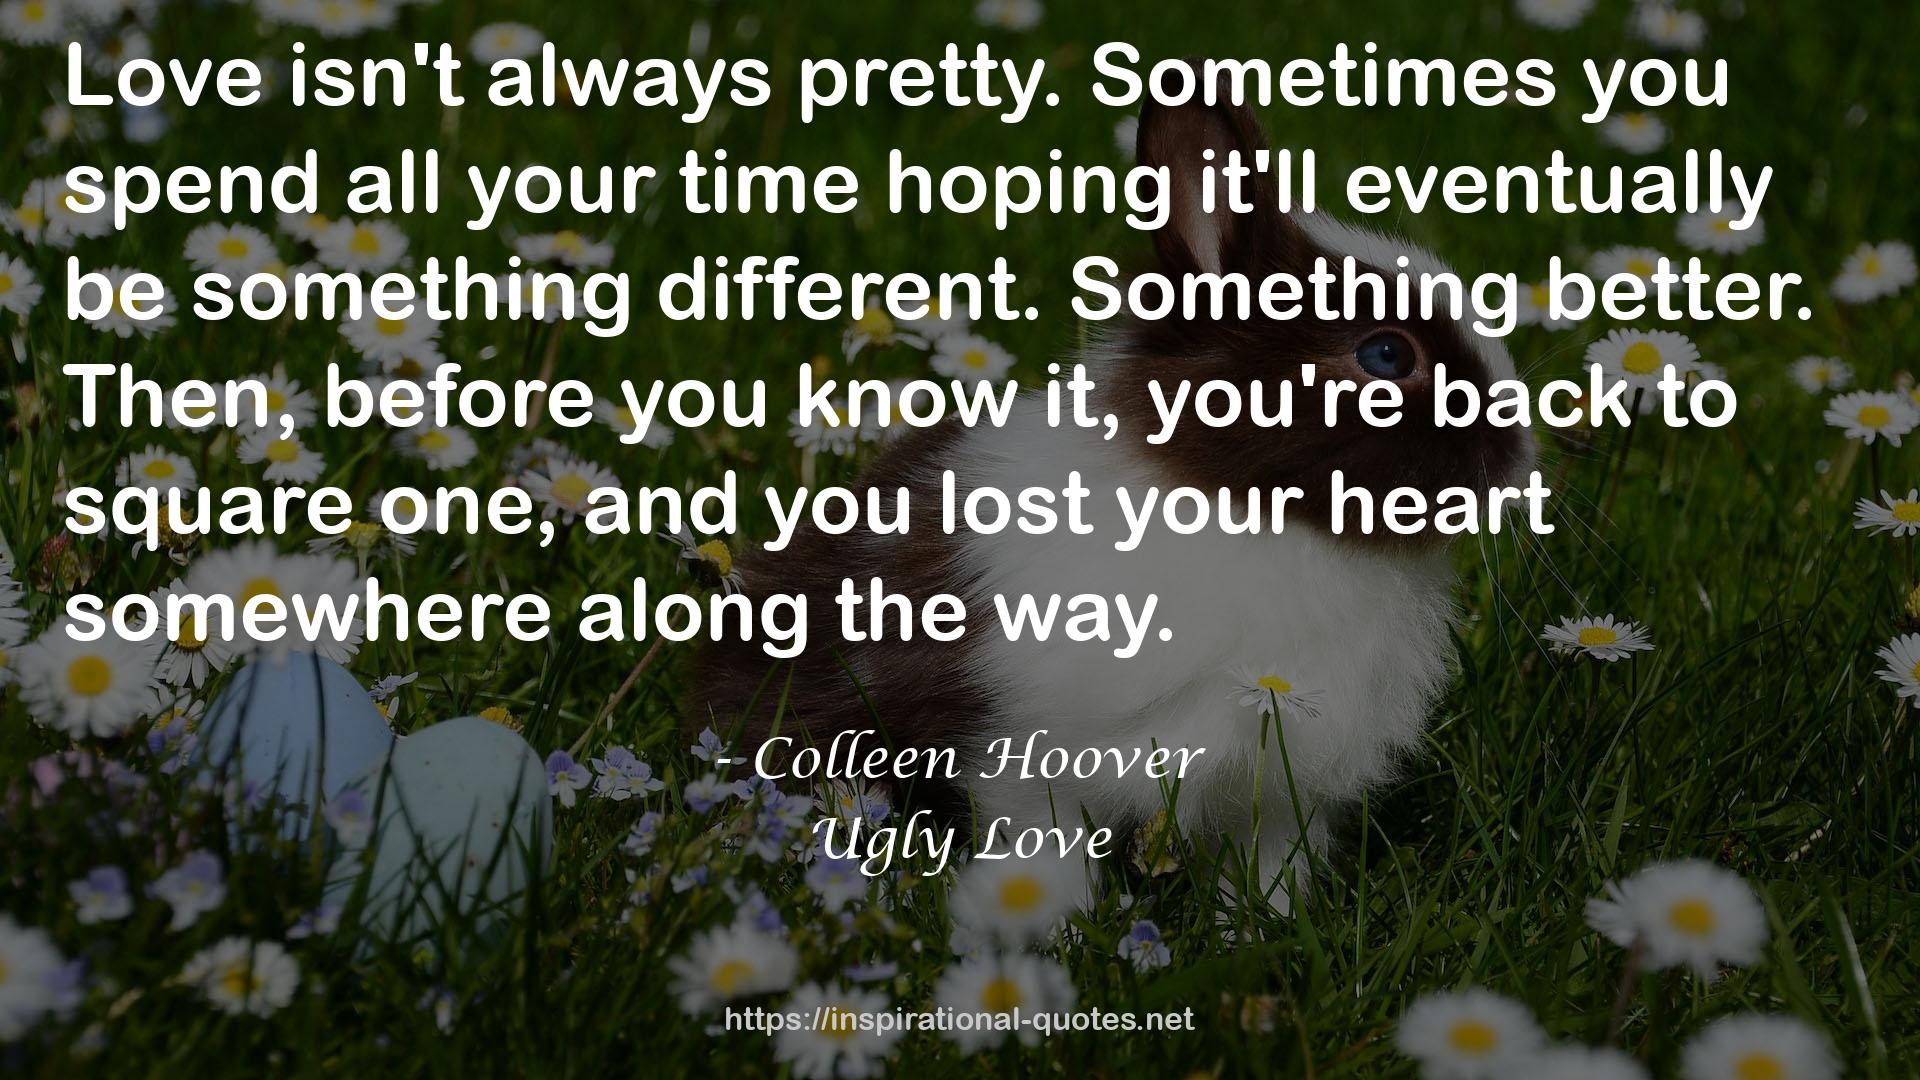 Ugly Love QUOTES